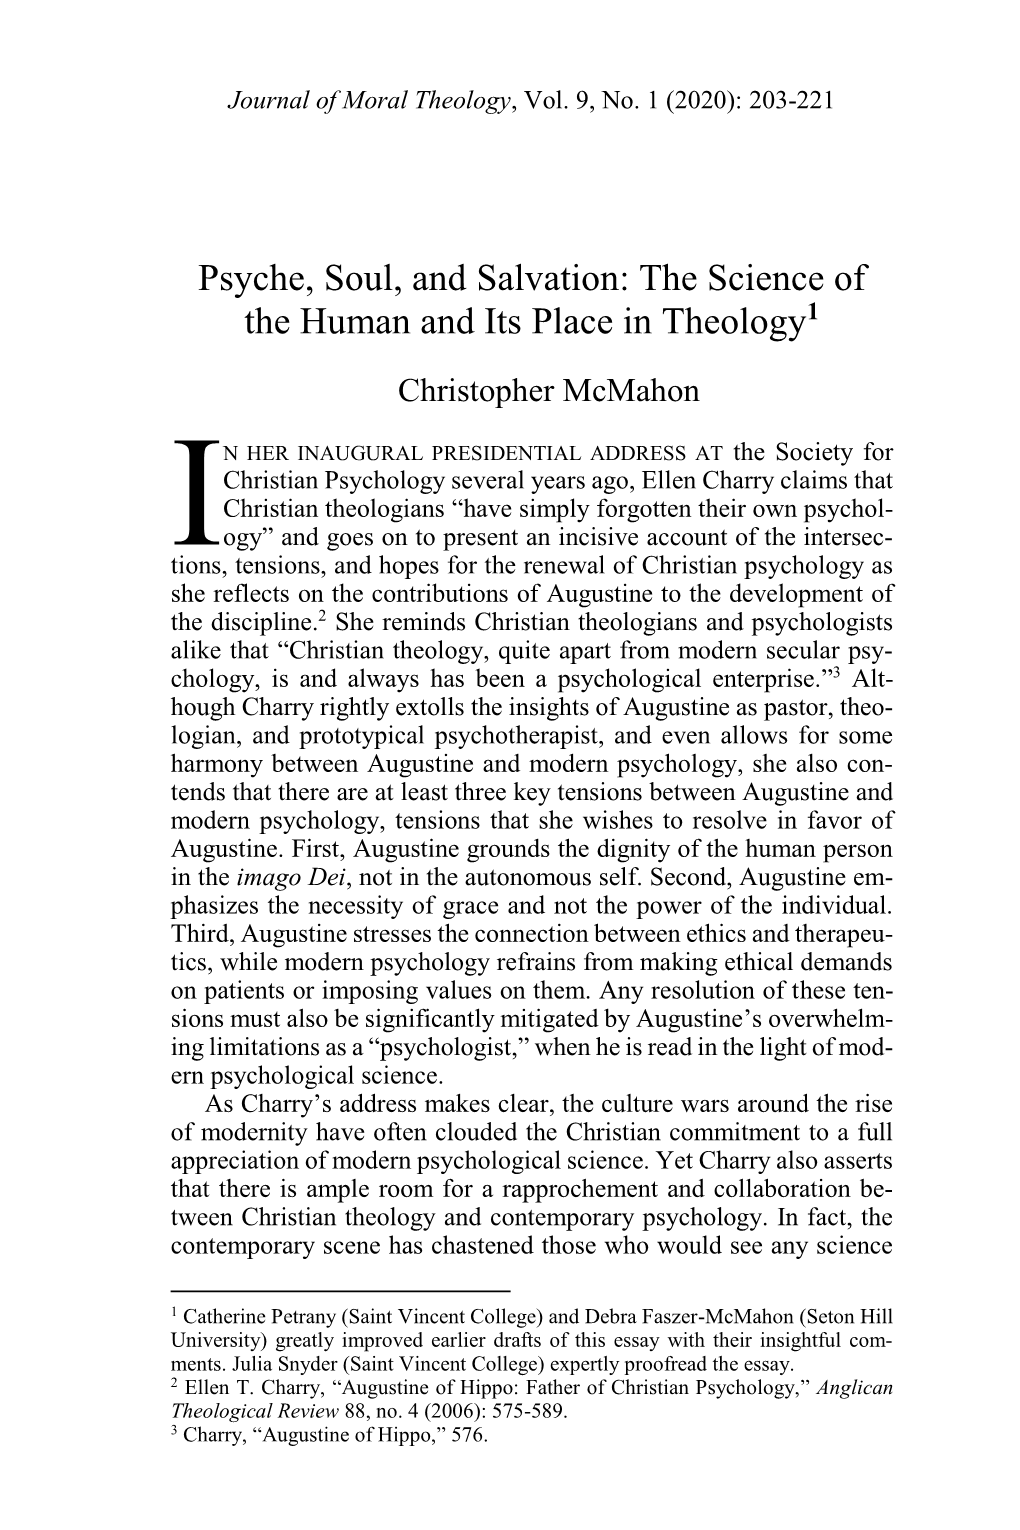 Psyche, Soul, and Salvation: the Science of the Human and Its Place in Theology1